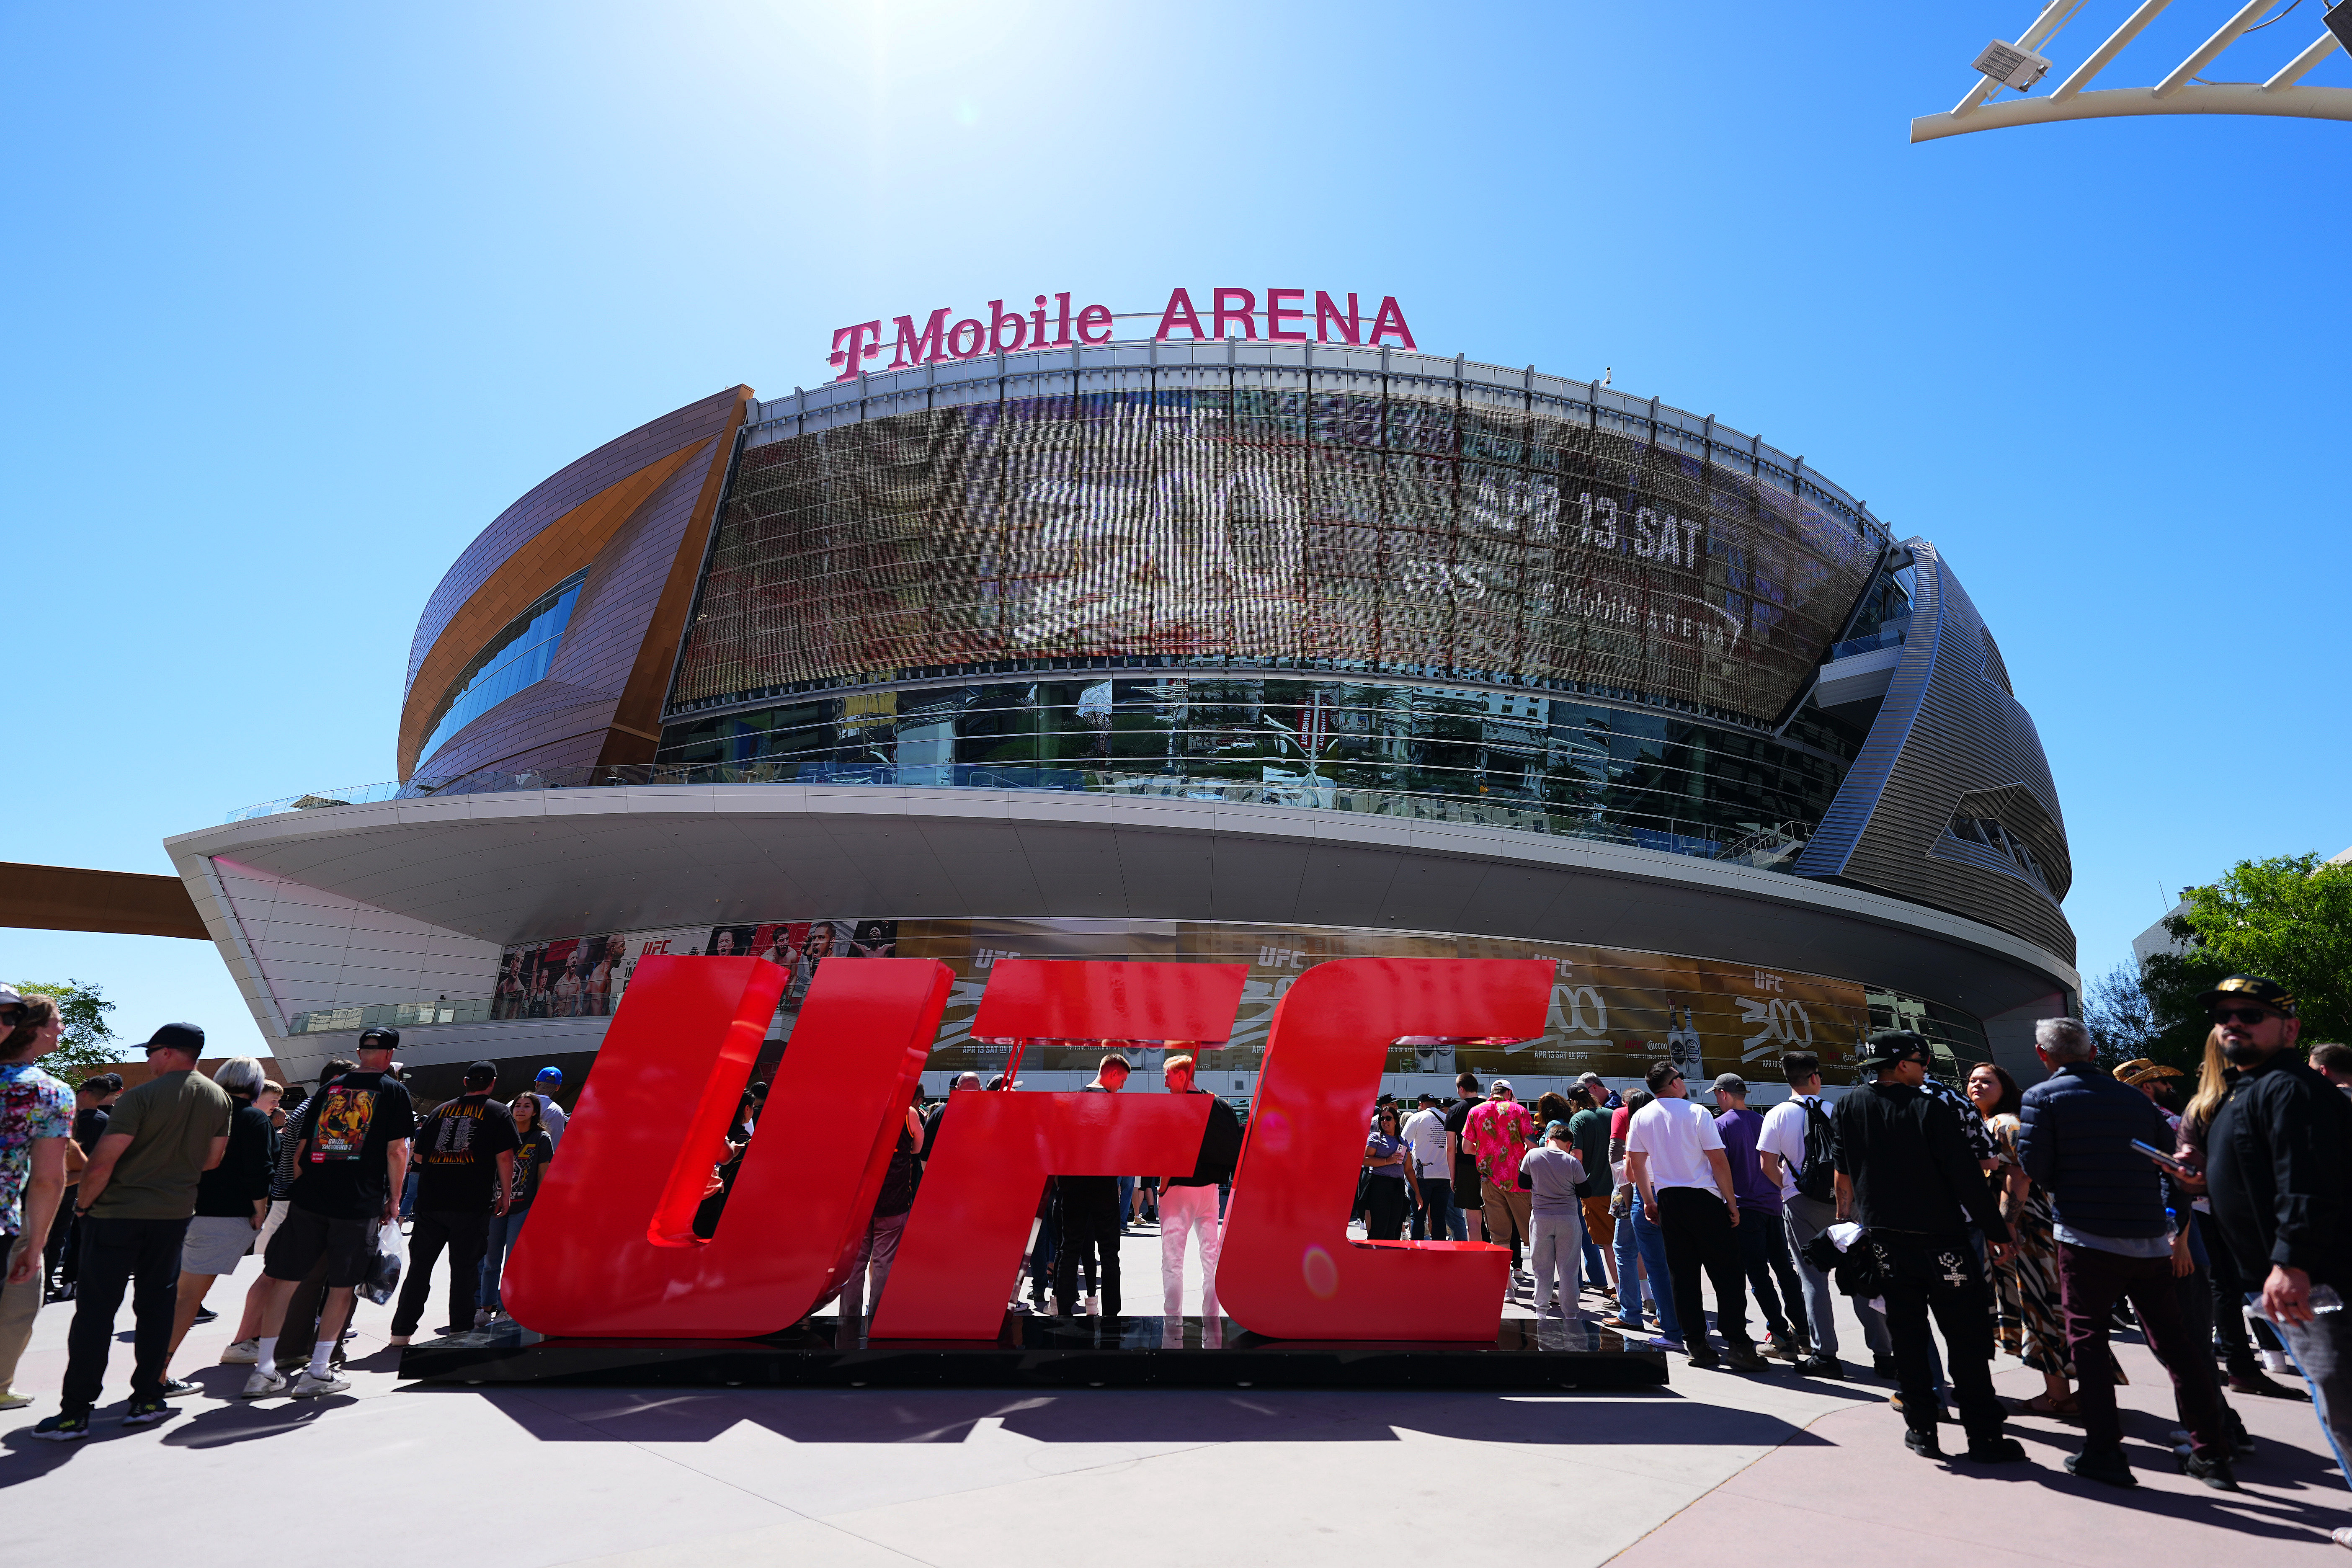 UFC 300 took place last weekend at the T-Mobile Arena in Las Vegas